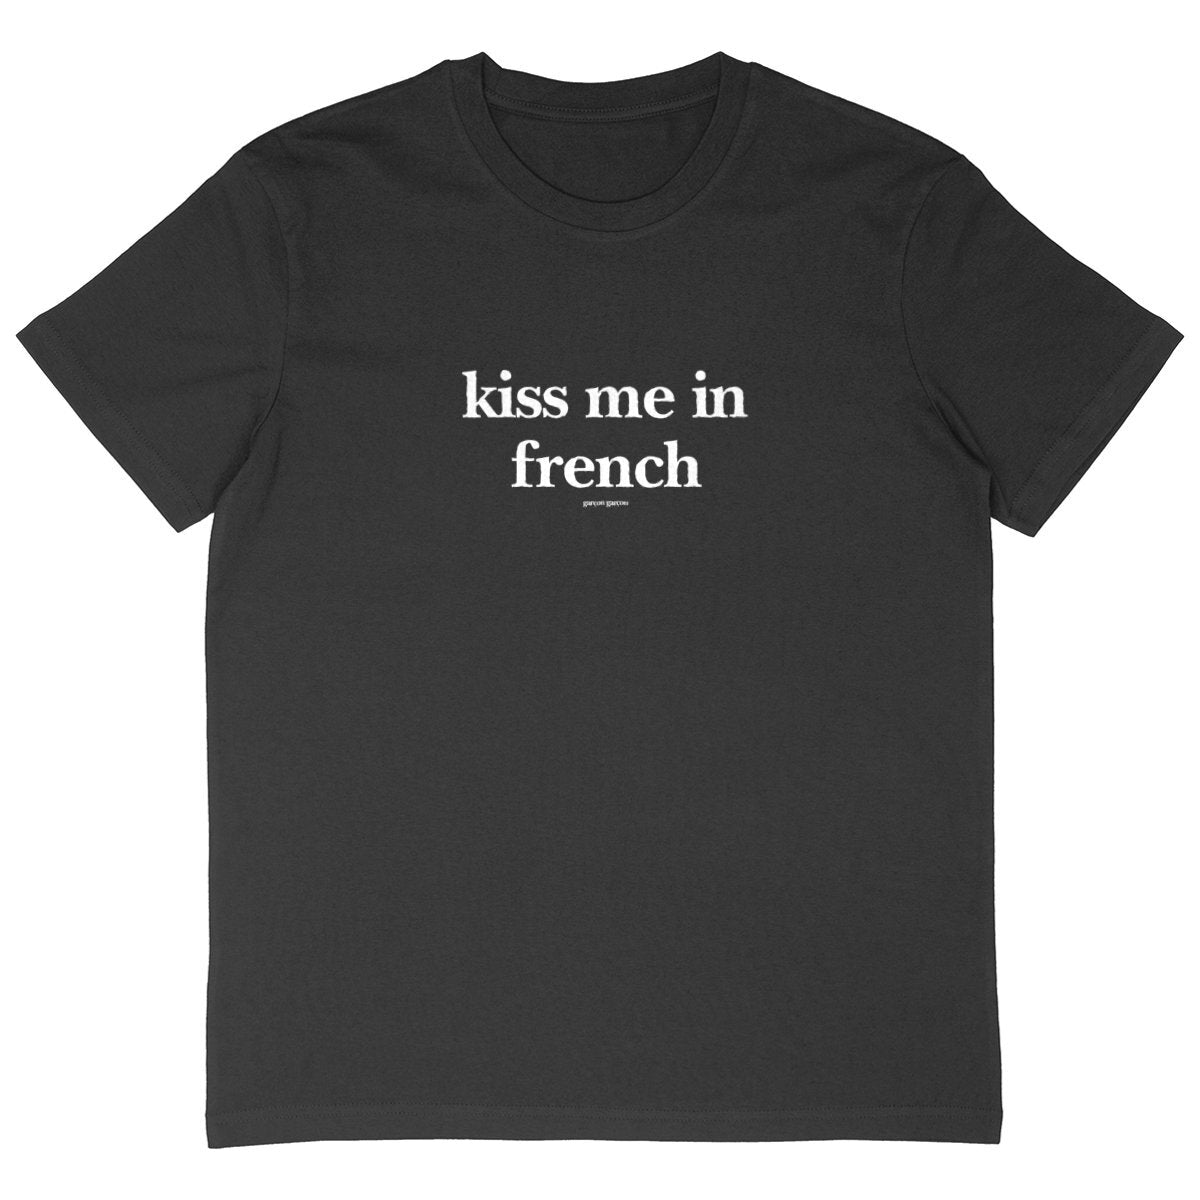 kiss me in french oversized tee. garçon garçon tee oversize BLACK. Dive into the essence of Parisian cool with this oversized tee. The subtle 'garçon garçon' signature whispers a chic narrative, offering a slice of the city's famed elegance. Perfect for those who speak style with simplicity.